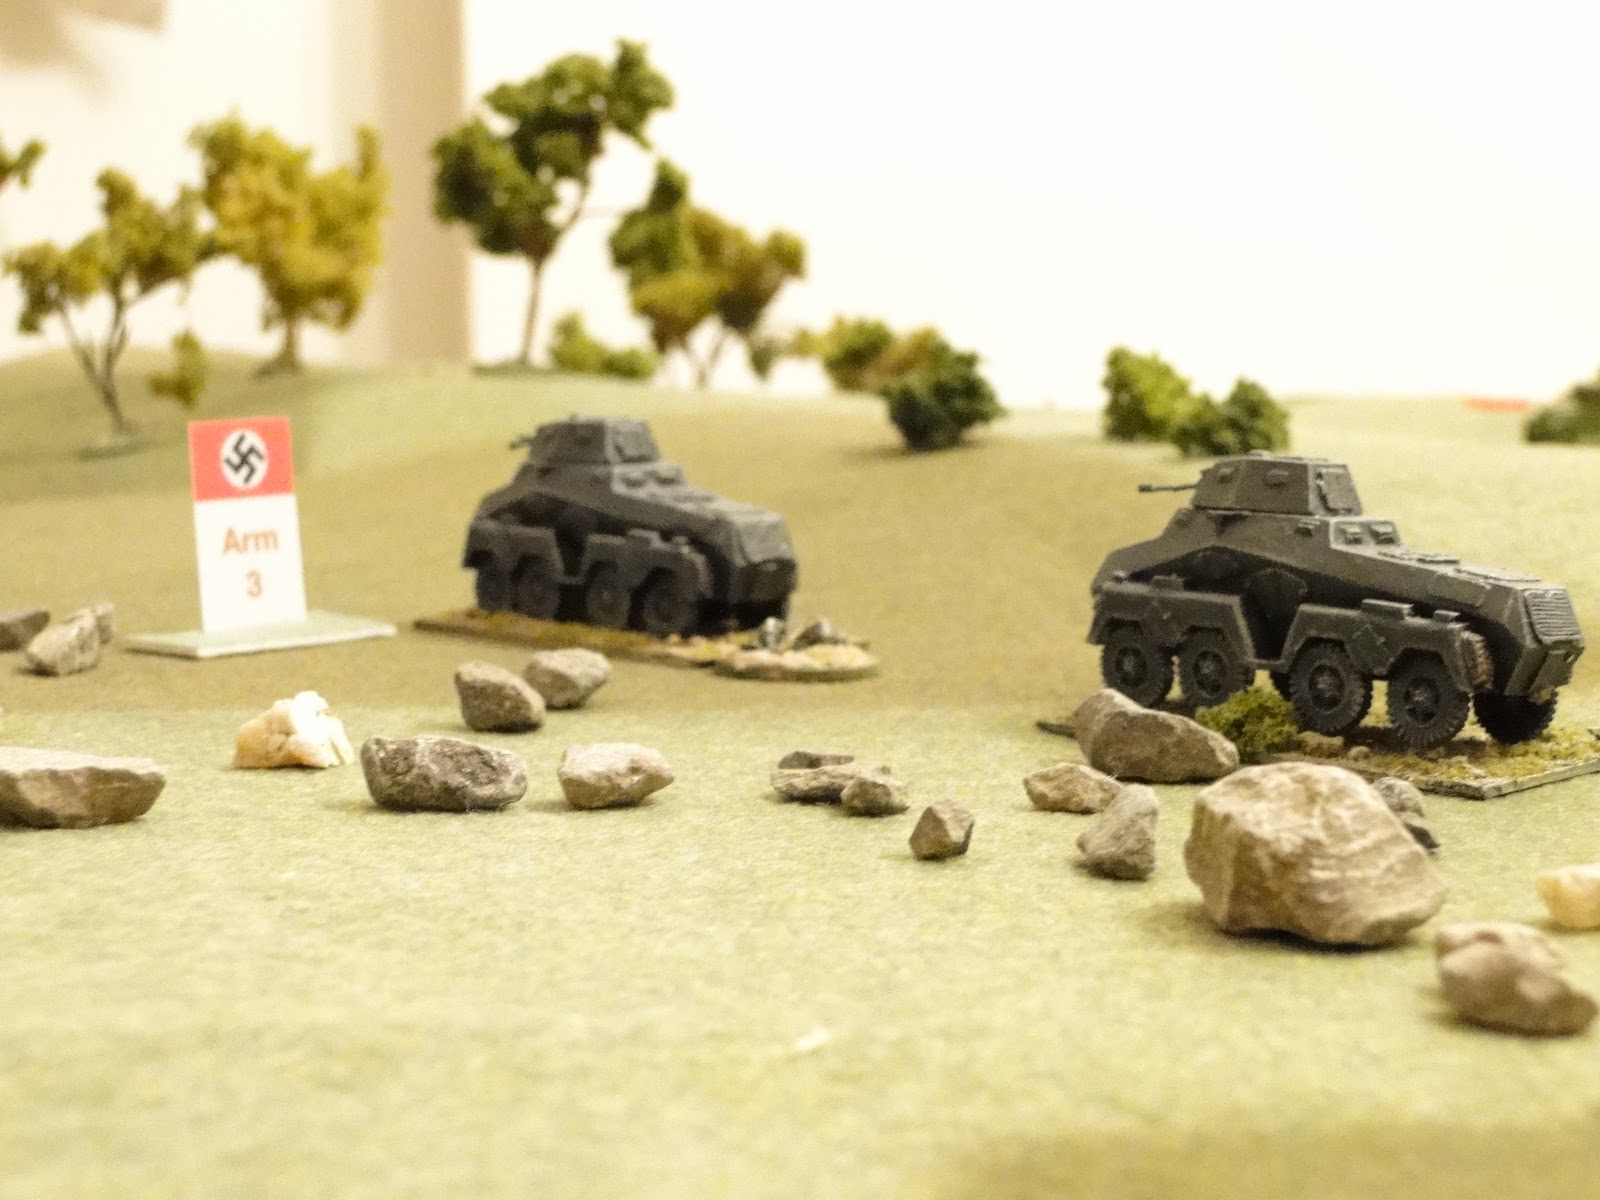 The German Recce armoured cars break loose in the Russian rear.